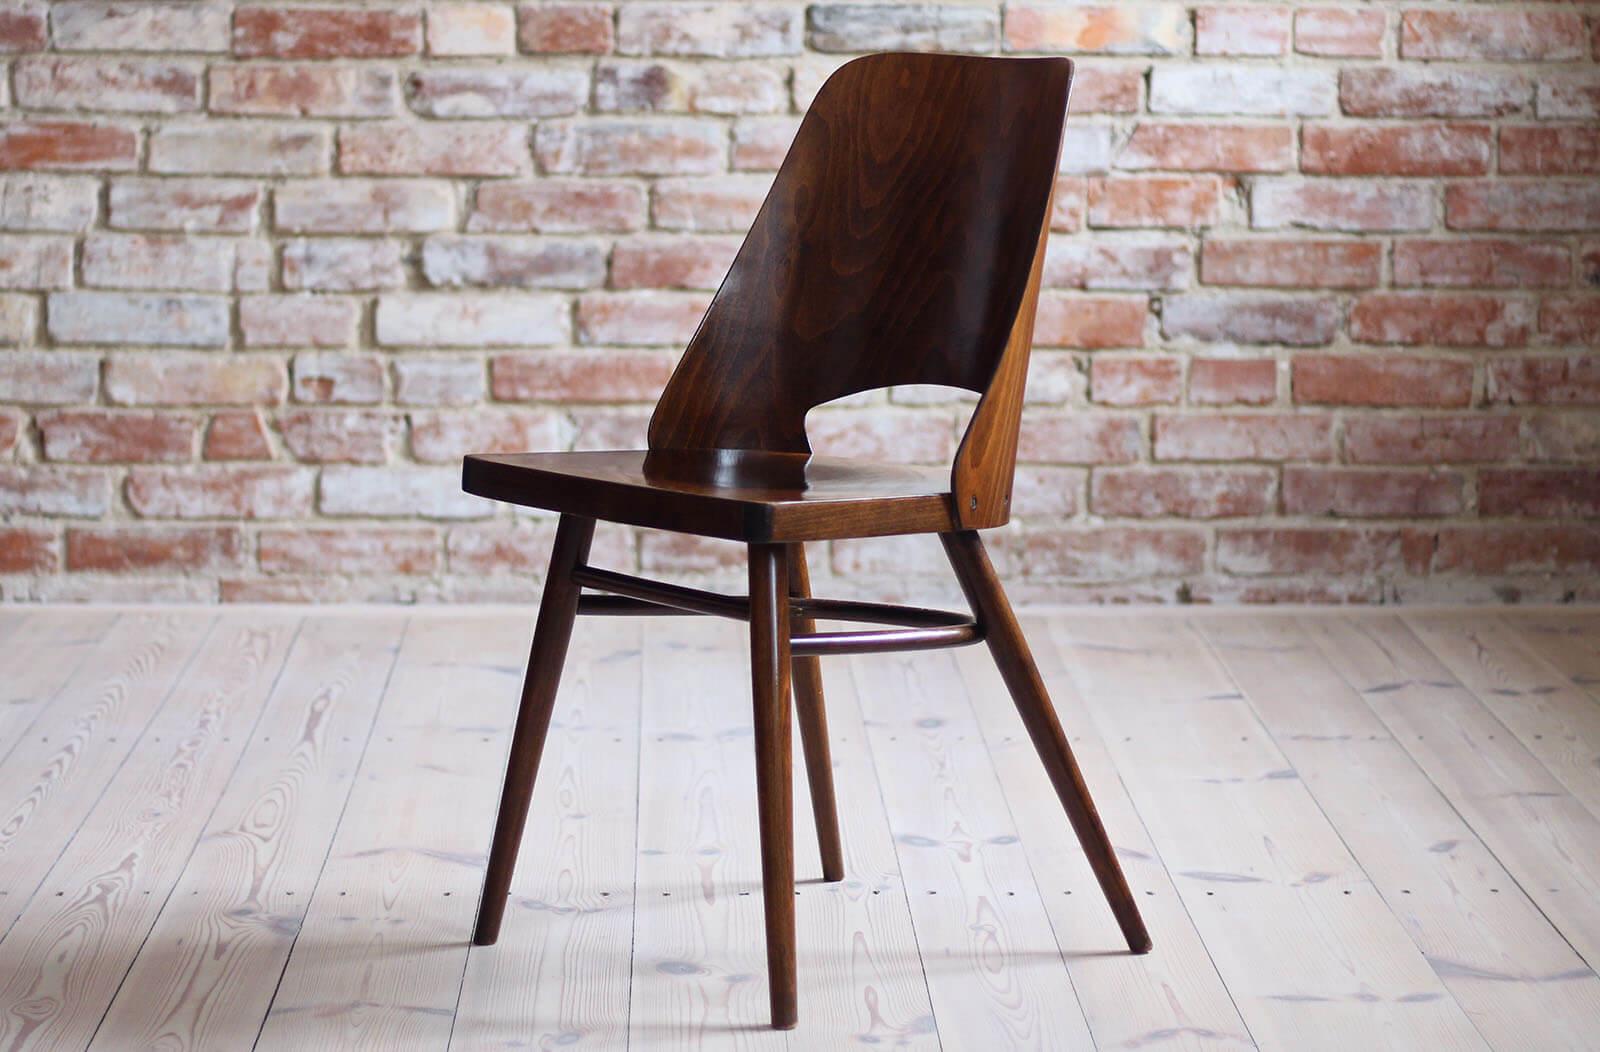 Set of 4 Dining Chairs by Radomir Hofman for TON, Model 514, Beech Veneer In Good Condition In Wrocław, Poland